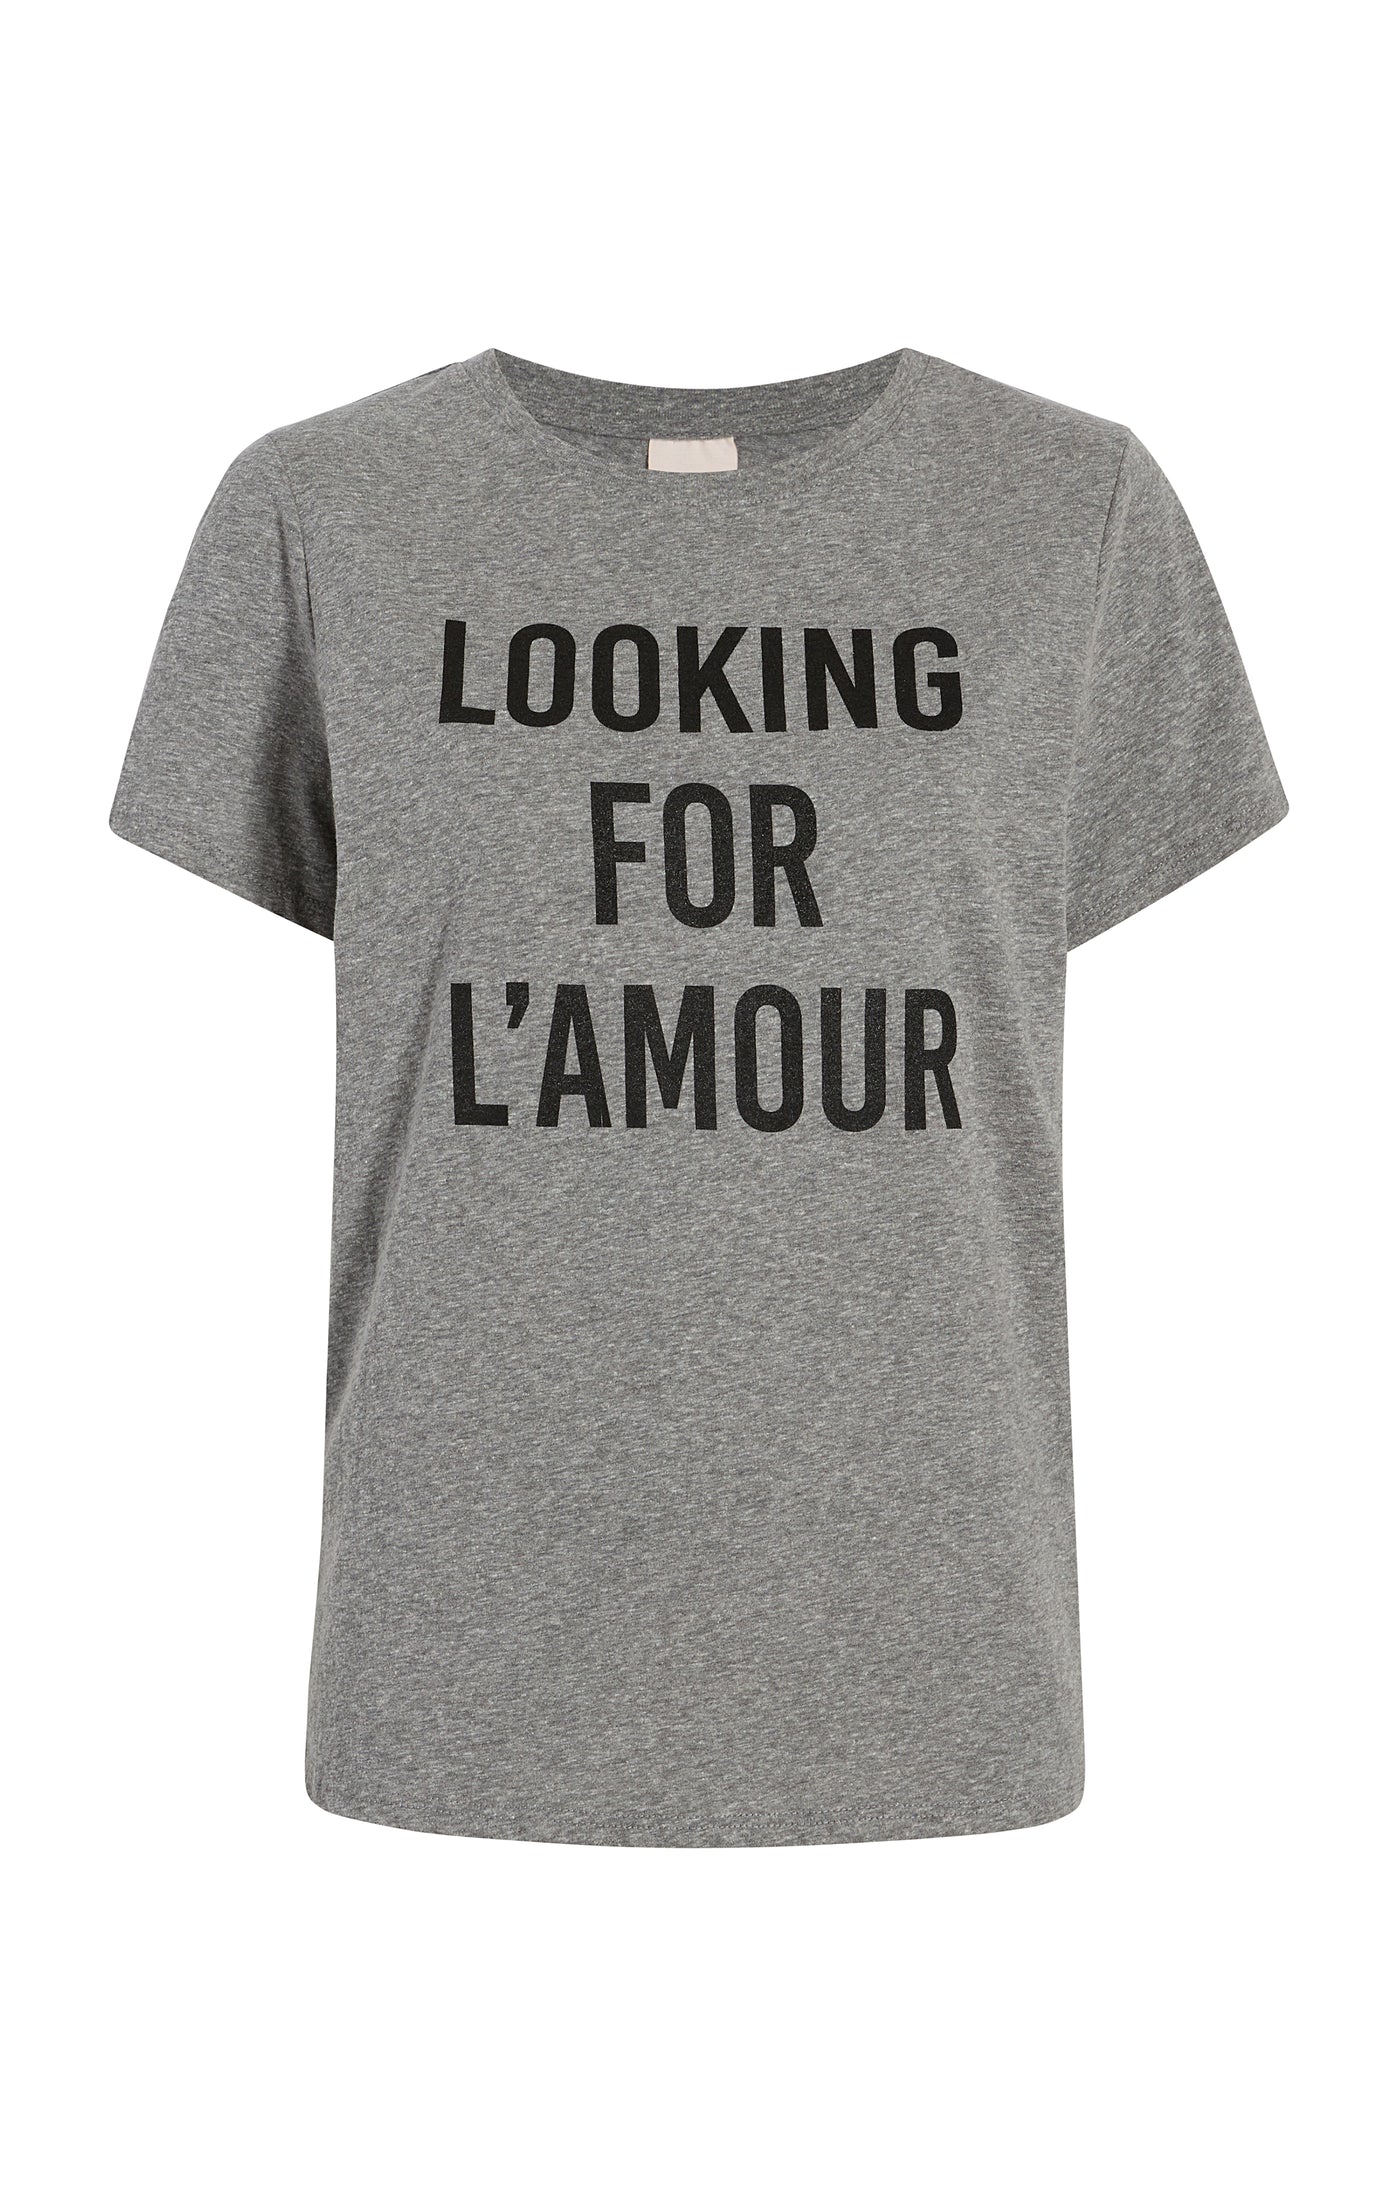 Looking For L'amour Tee